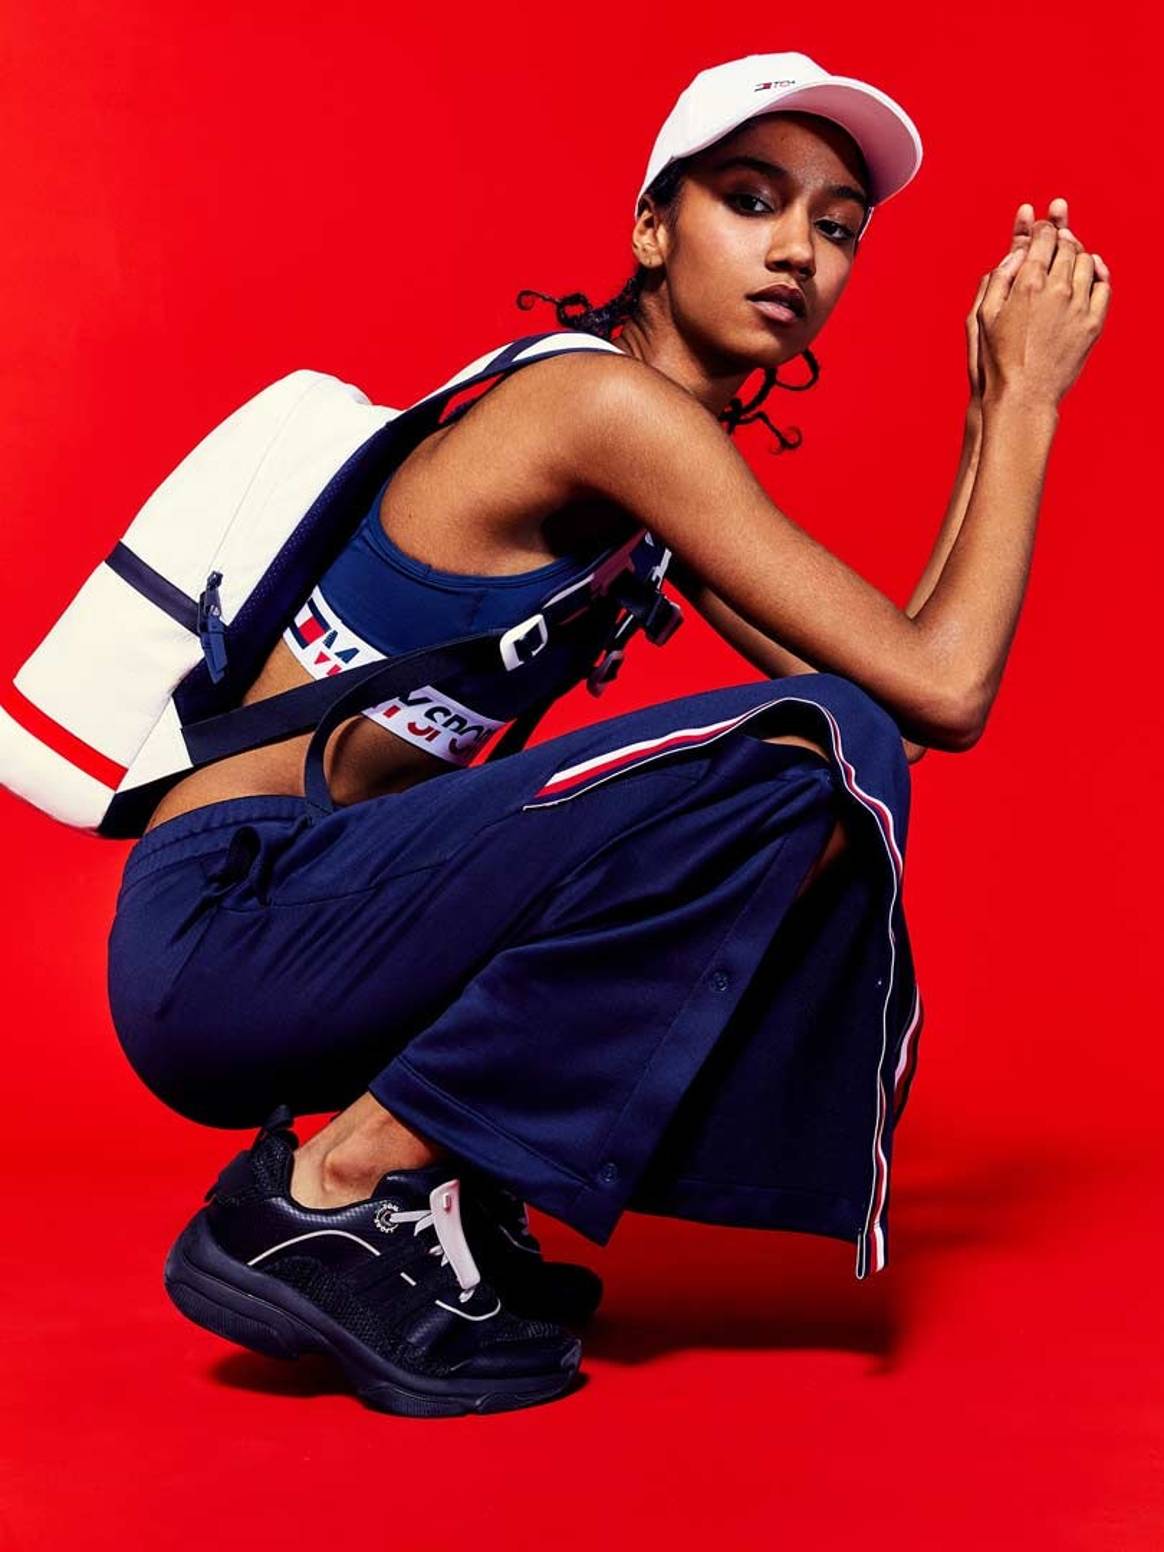 In pictures: Tommy Hilfiger launches Tommy sport, first sportswear apparel